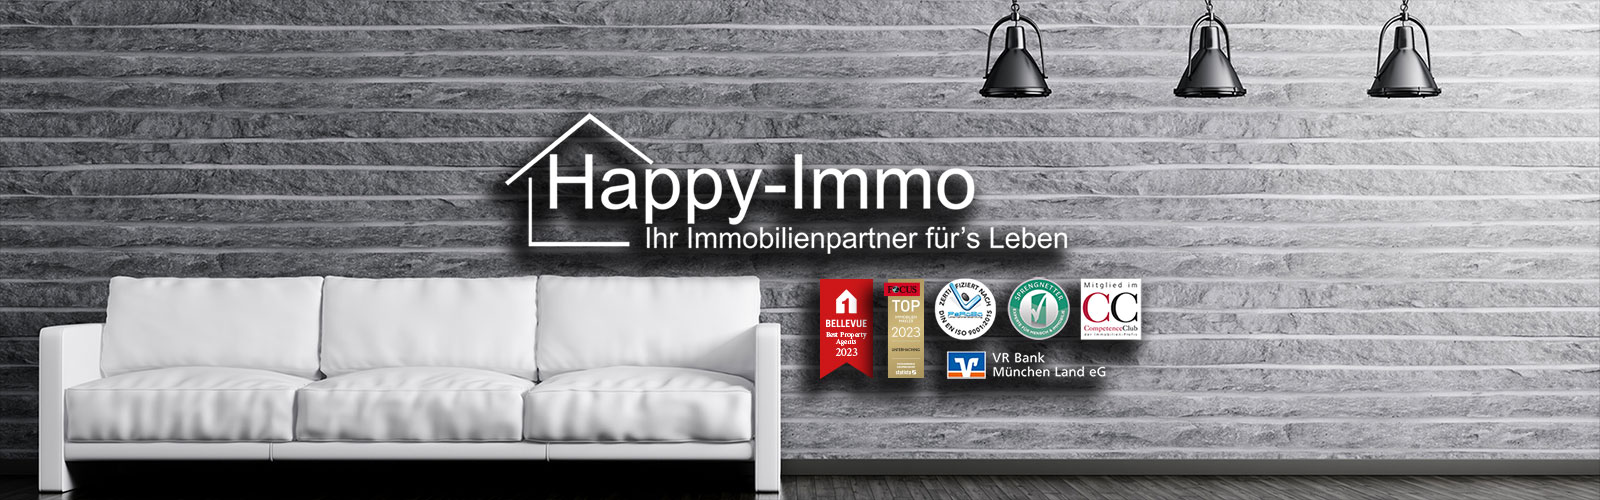 Happy Immo GmbH Immobilienmakler Lenggries 089-6494870